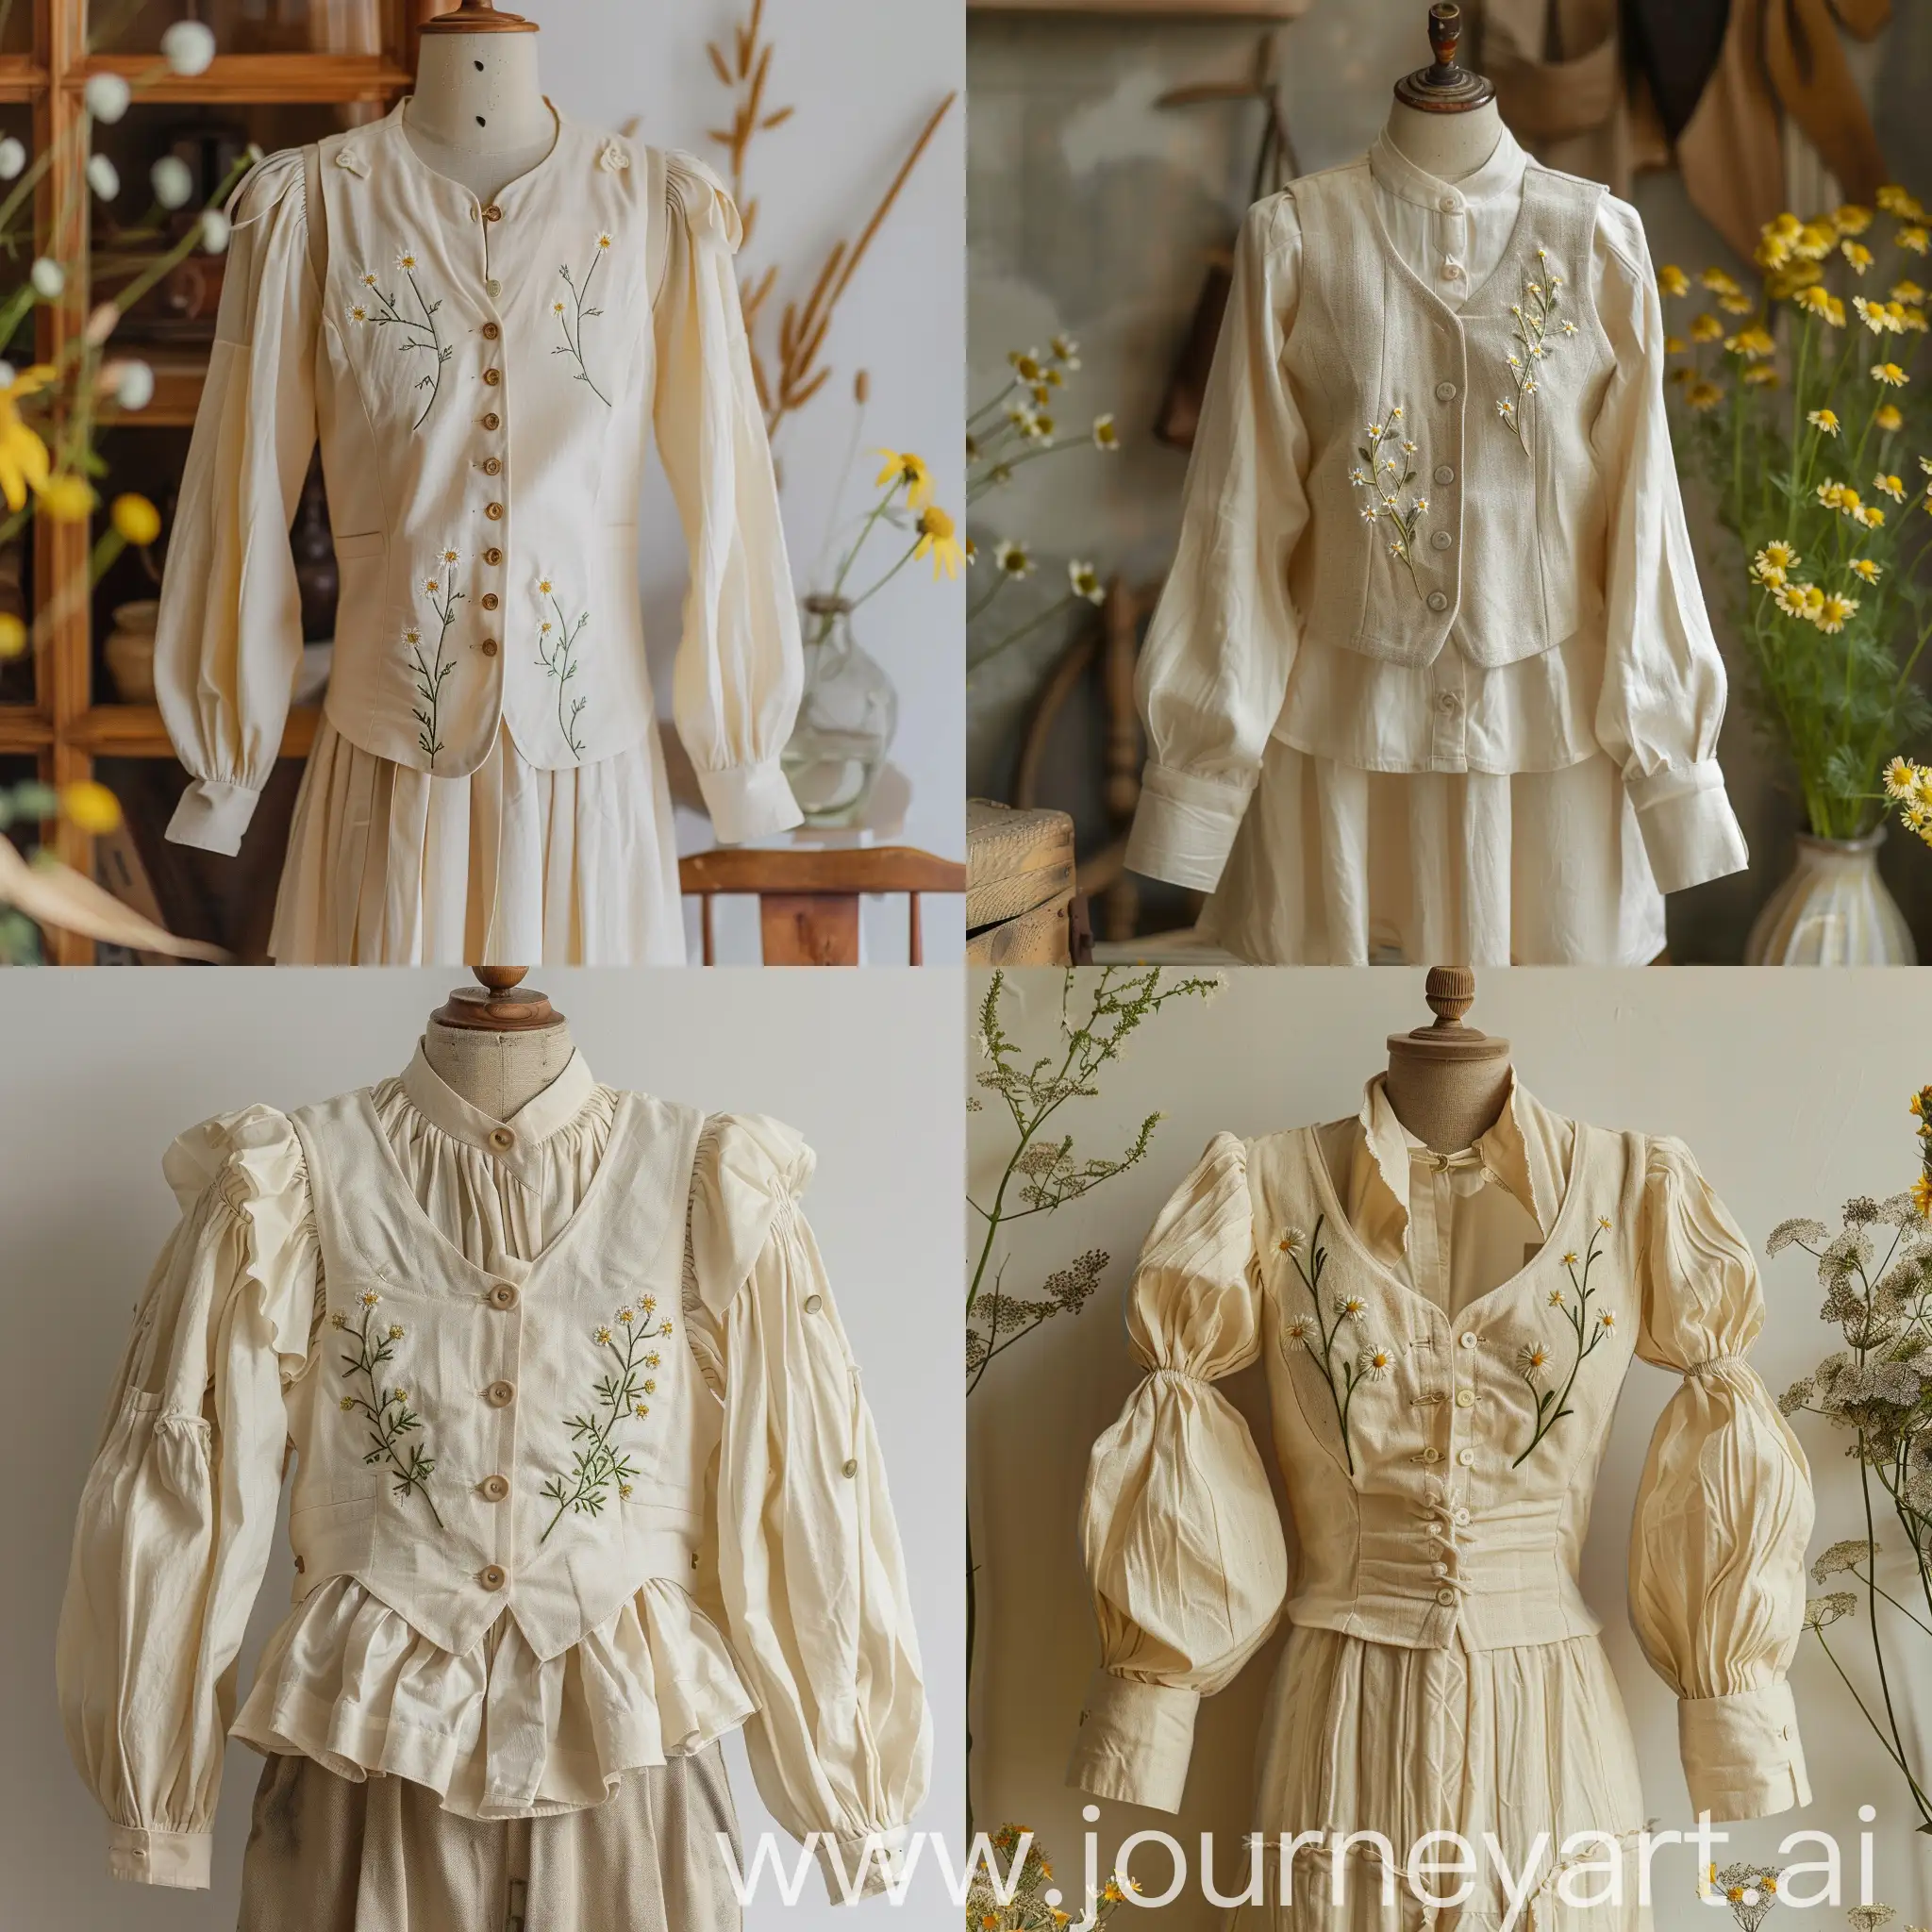 A blouse and vest, cotton material, cream color, small camomile branch embroidery, button front